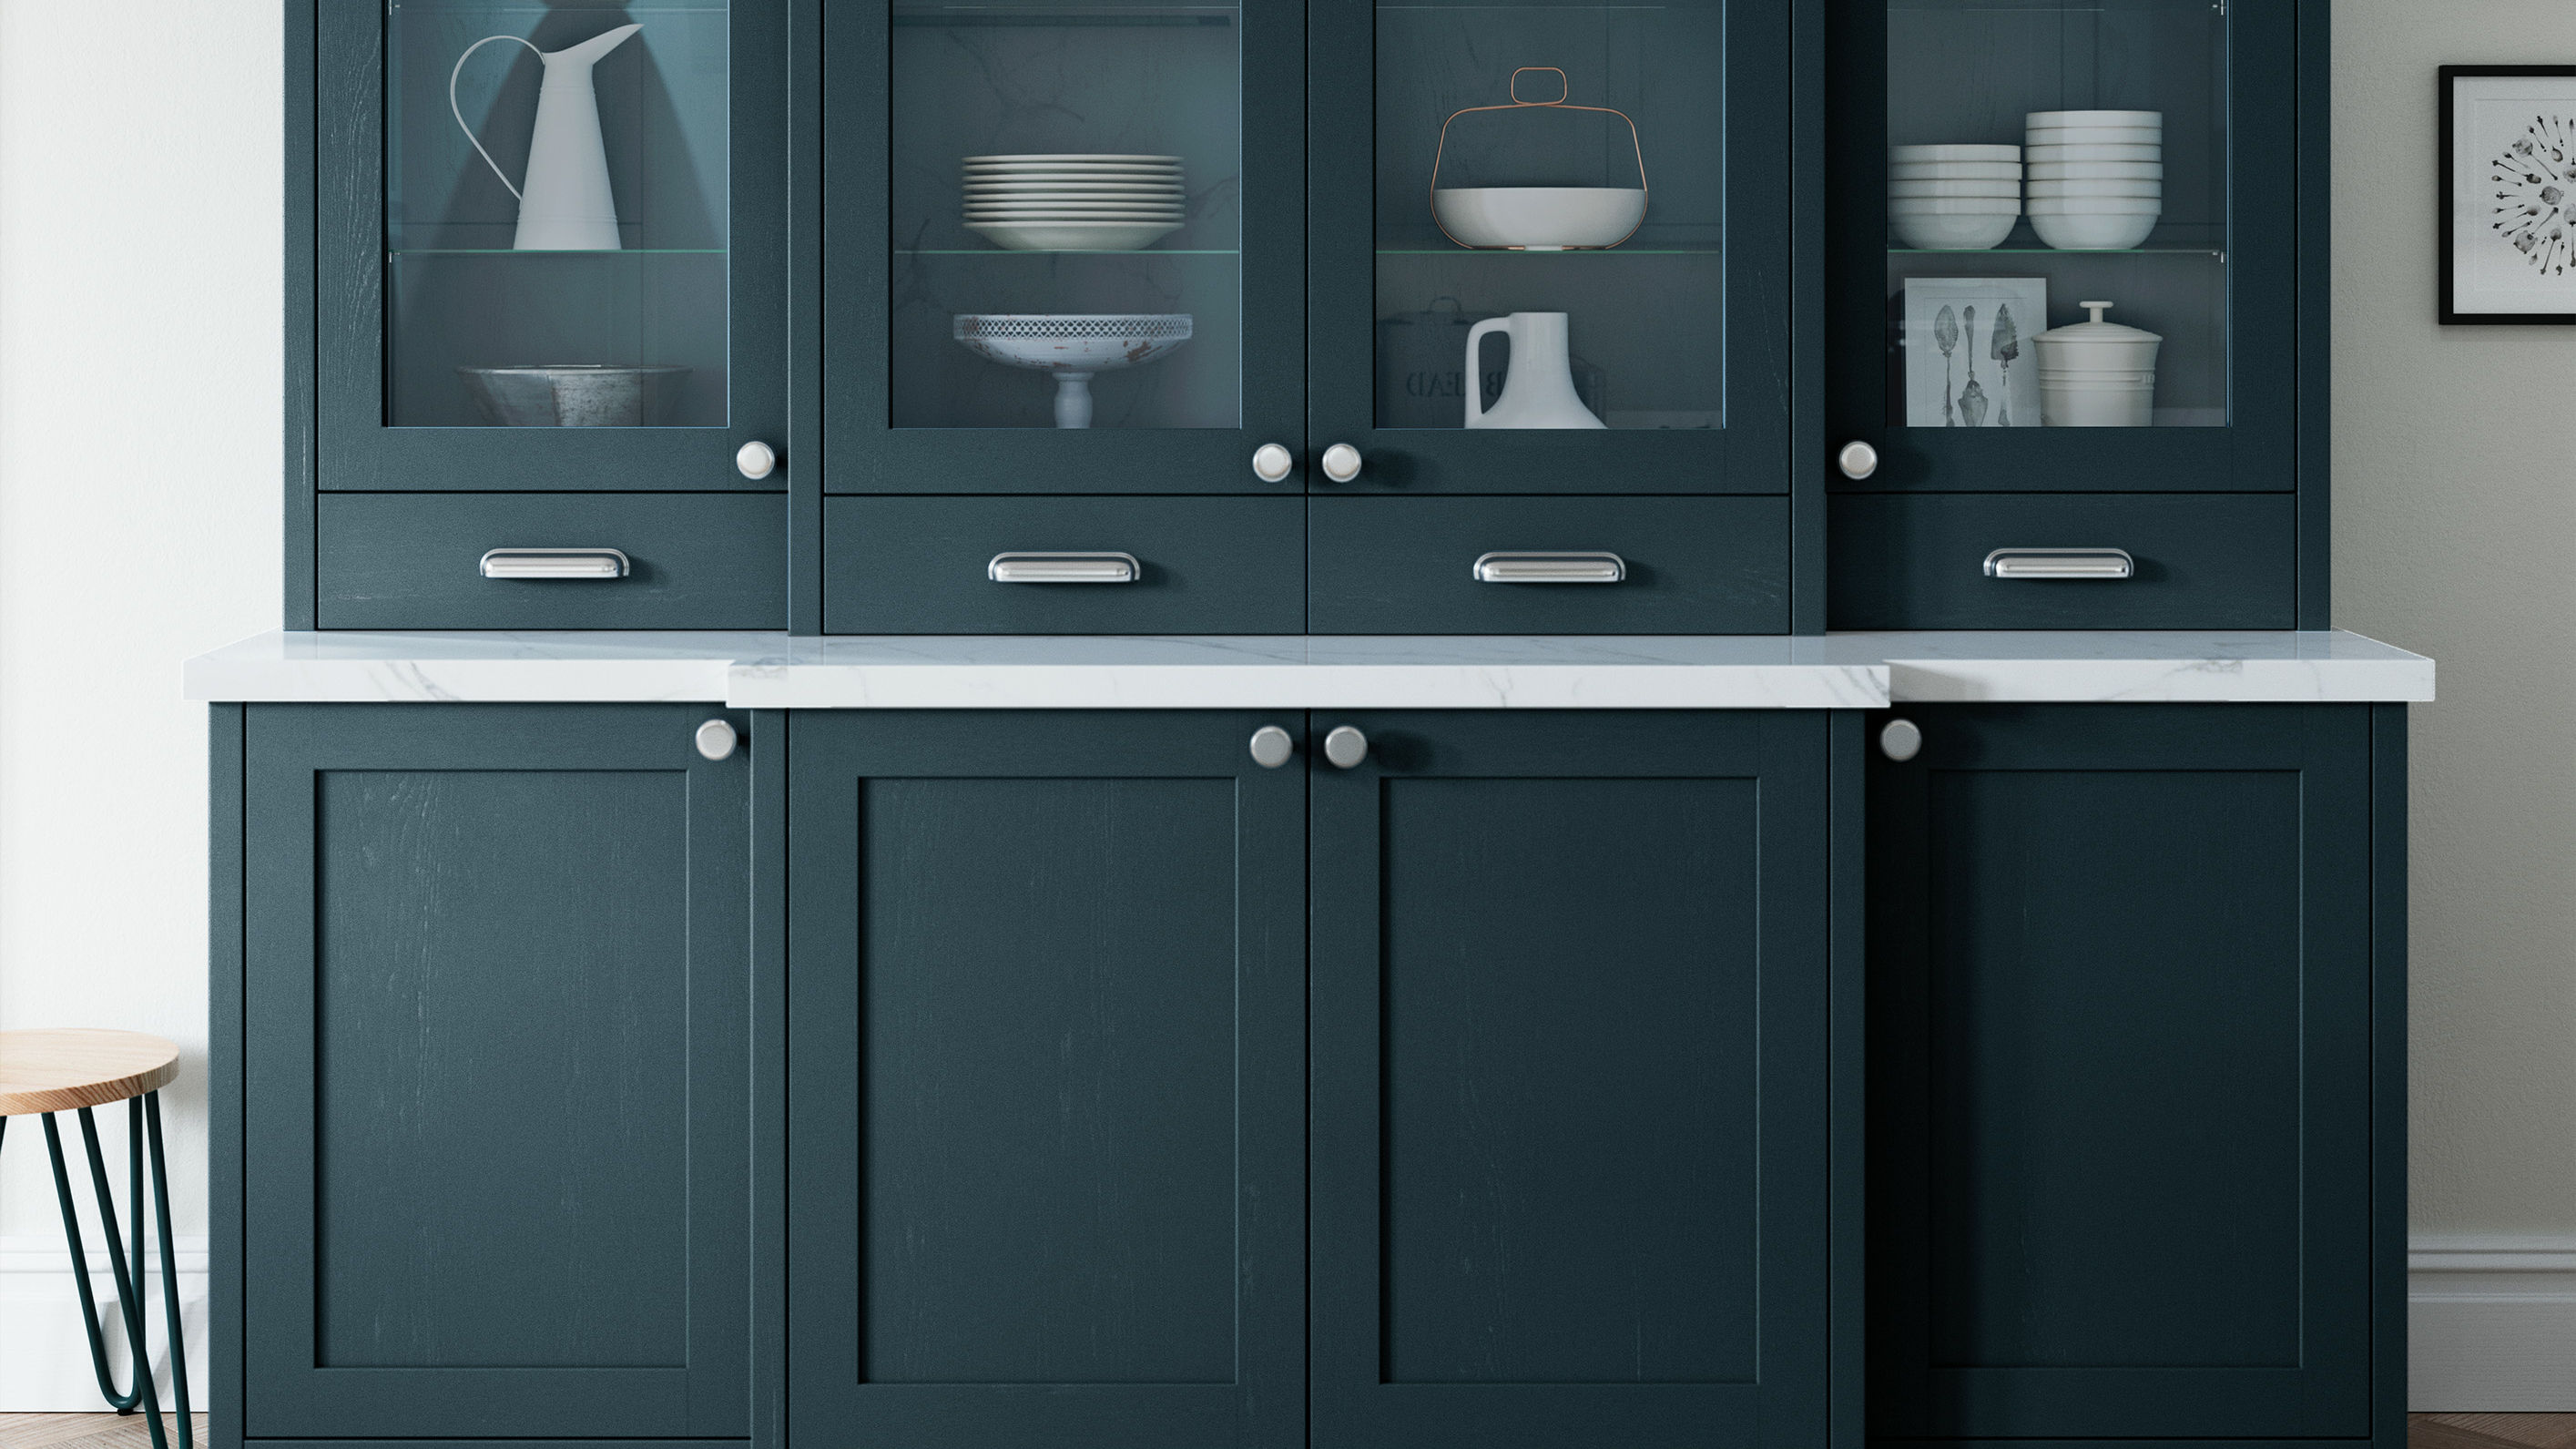 Aldana Solid Wood Marine kitchens combining timeless style with a rich marine blue finish